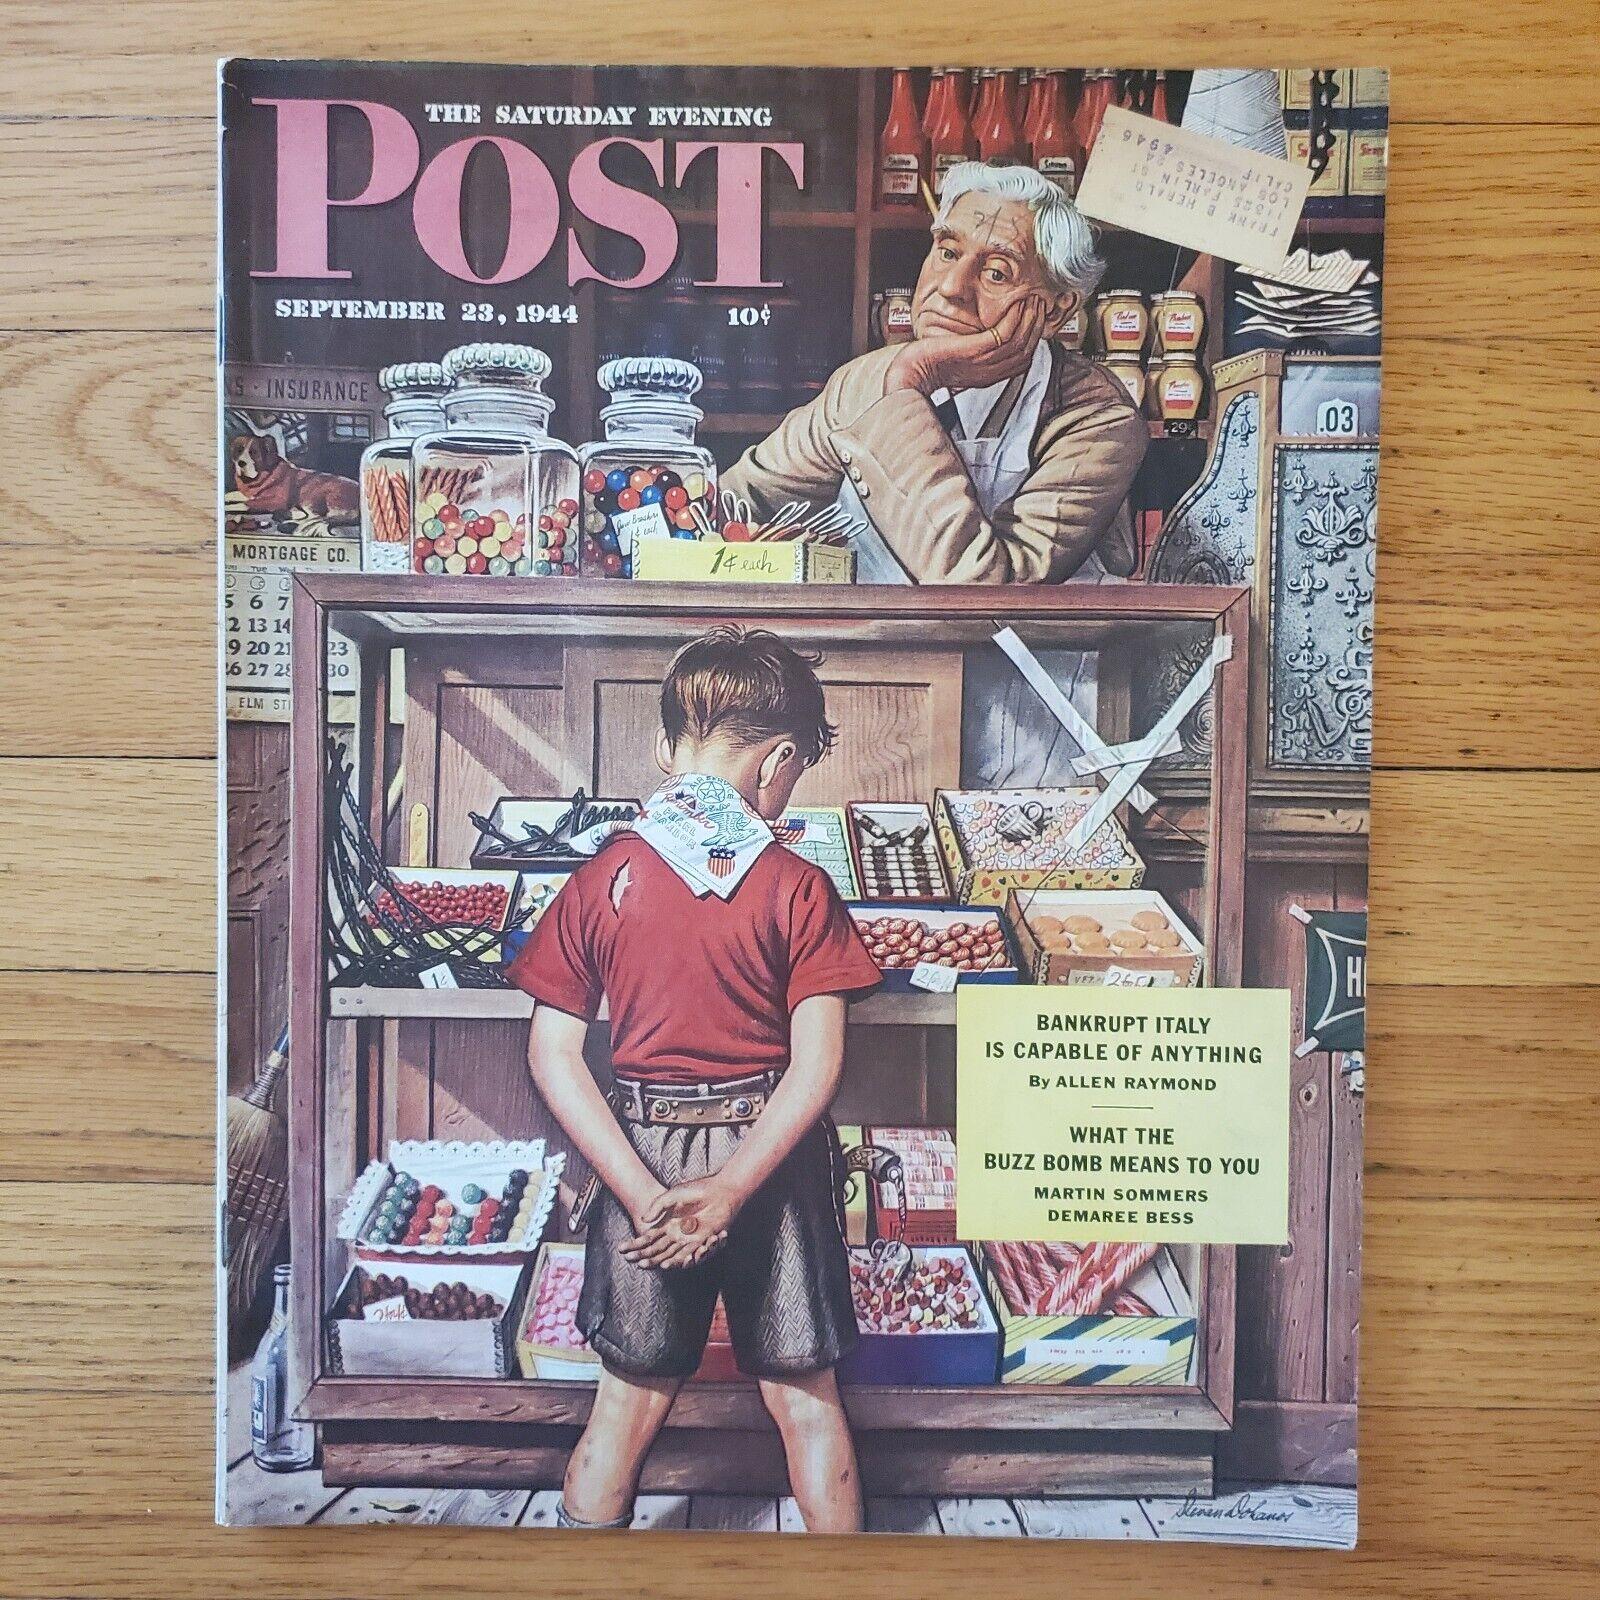 Signed Lower Right by Artist

The Saturday Evening Post Cover, September 23, 1944


A proponent of simplicity as a virtue, Stevan Dohanos has said, 